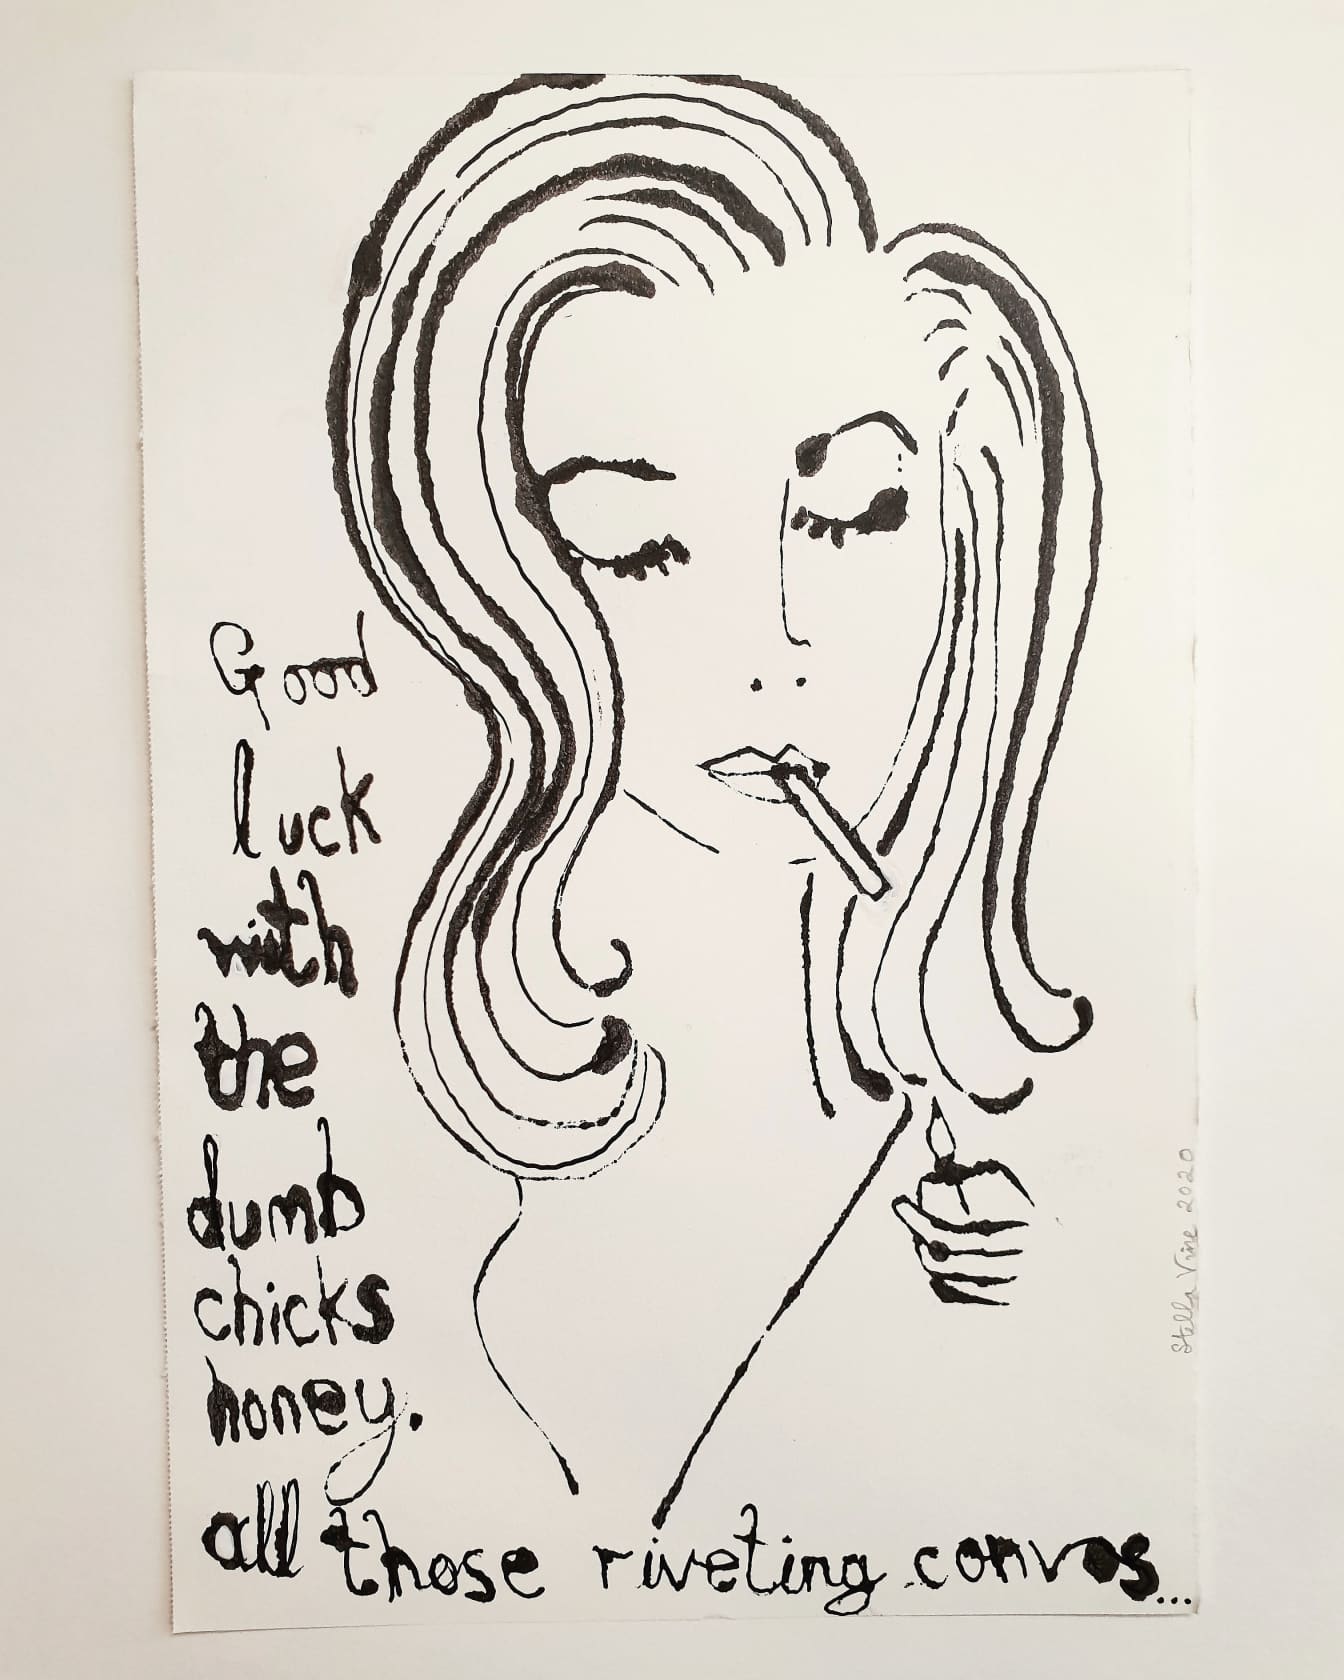 Stella Vine Good Luck with all the Dumb Chicks Honey, All Those Riveting Convos.... Ink on Paper